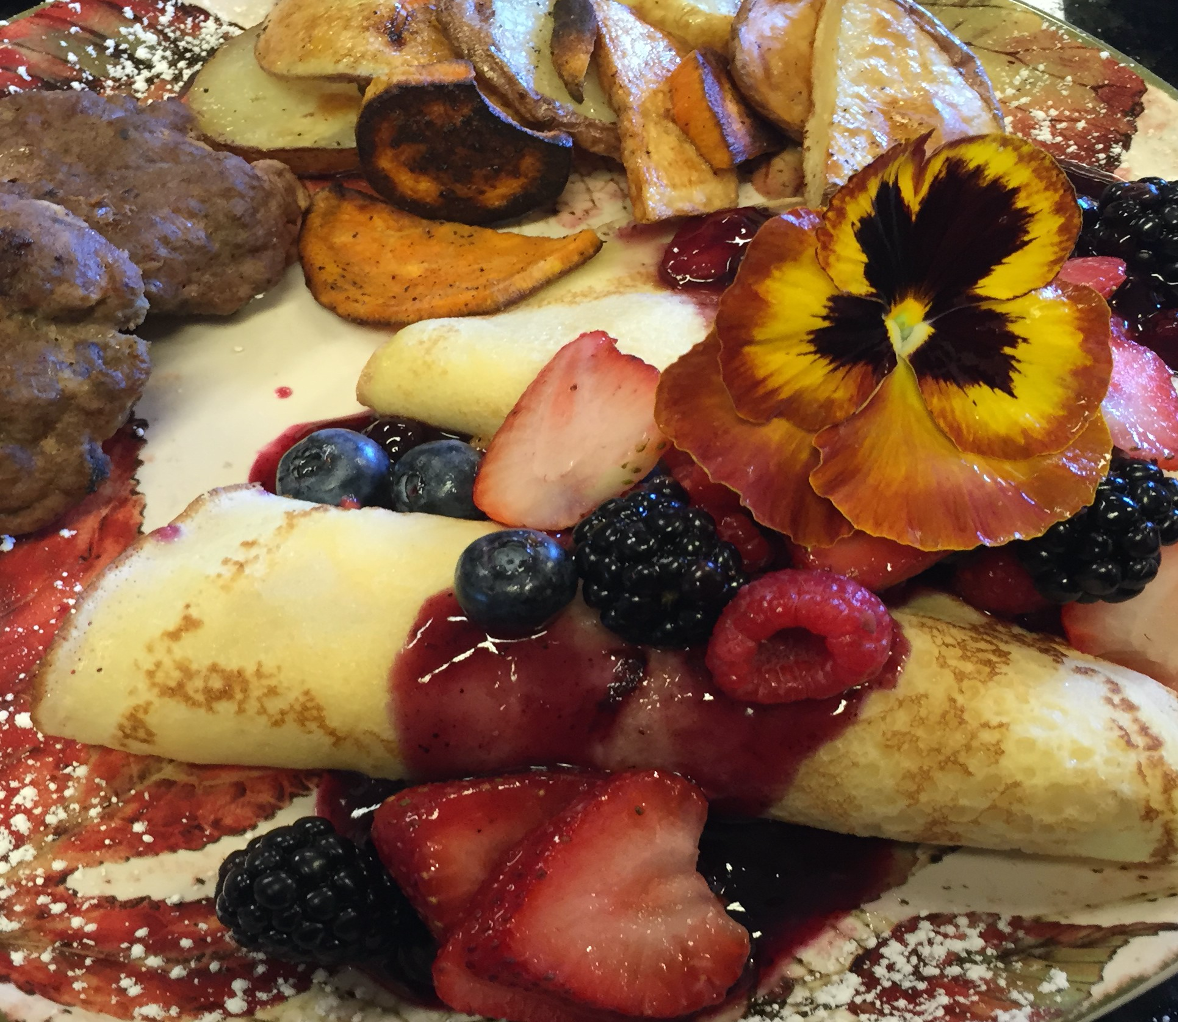 Breakfast at Annville Inn. Crepes with a warm berry sauce, home made sausage, oven roasted potato medly. Garnished by a unique colorful pansy.